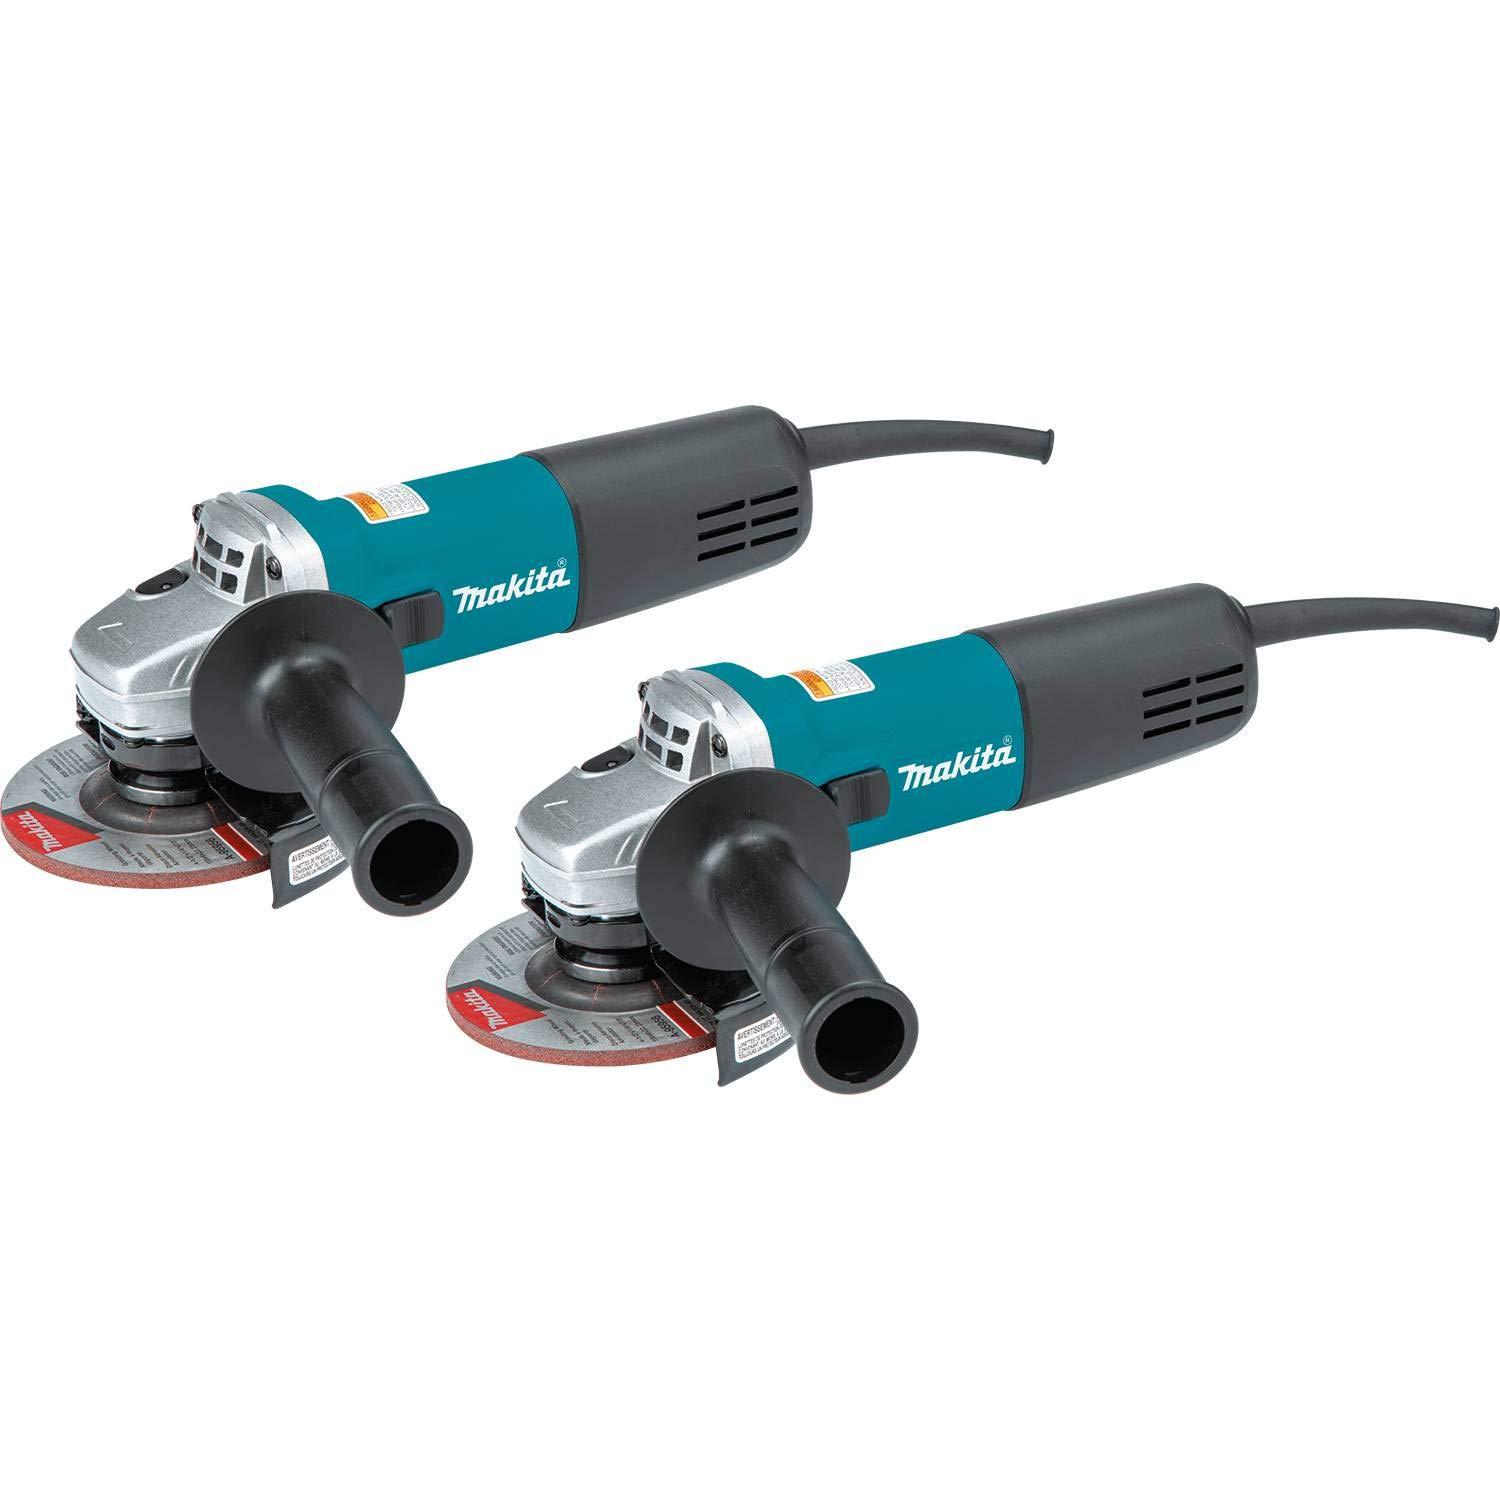 makita 9557nb2 4-1/2" angle grinder, with ac/dc switch (2 pack)